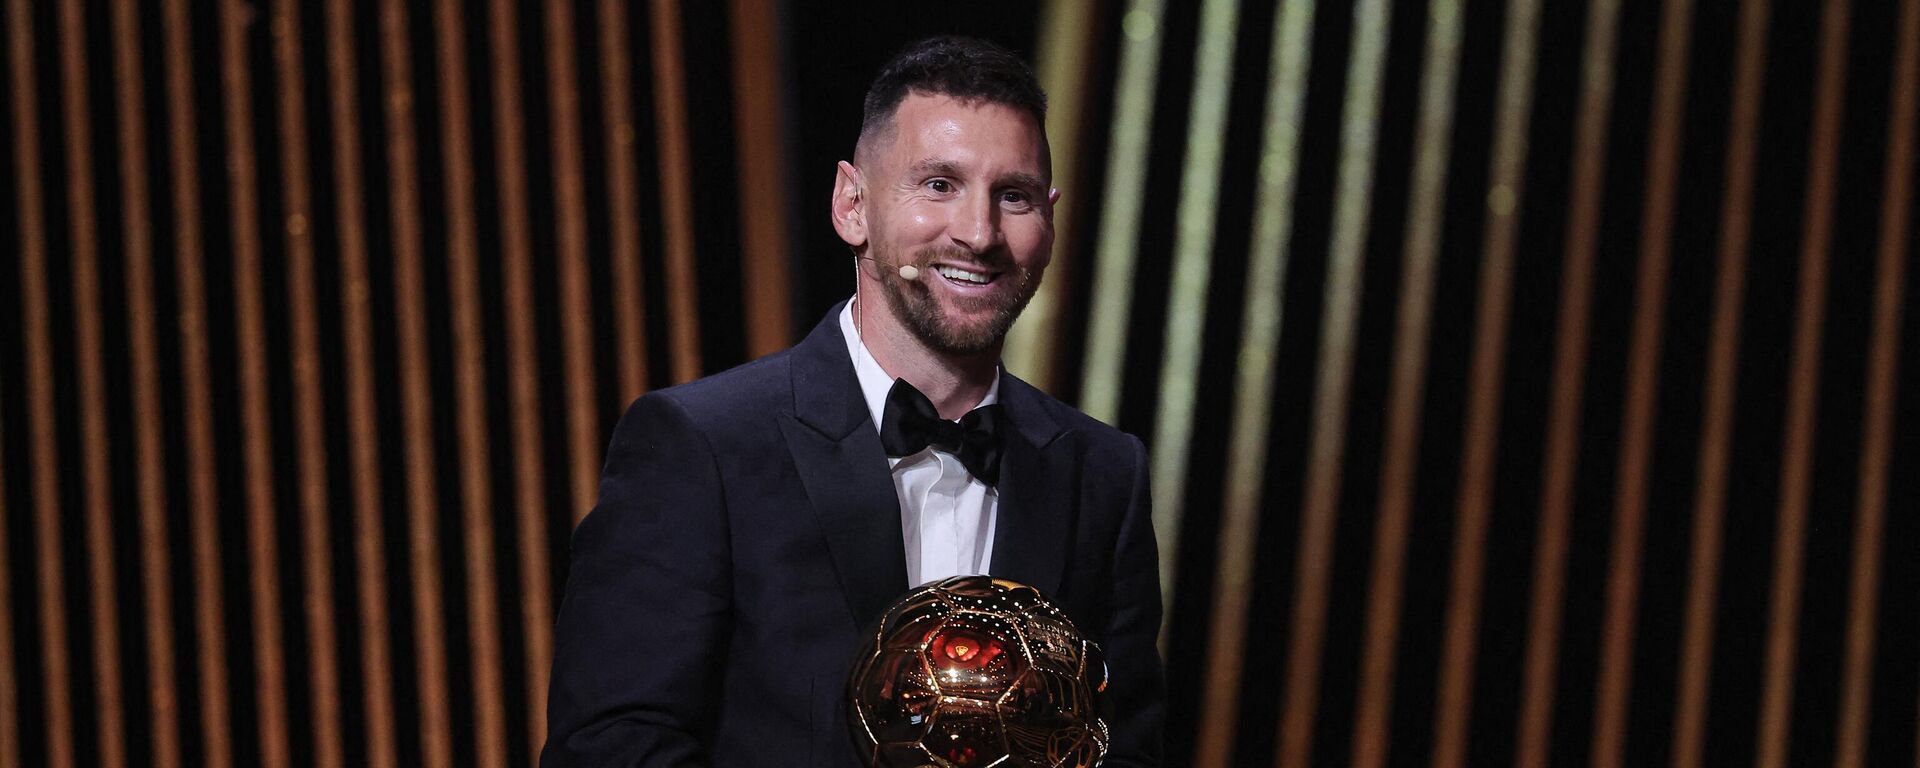 Inter Miami CF's Argentine forward Lionel Messi reacts on stage with his trophy as he receives his 8th Ballon d'Or award during the 2023 Ballon d'Or France Football award ceremony at the Theatre du Chatelet in Paris on October 30, 2023 - Sputnik Africa, 1920, 02.11.2023